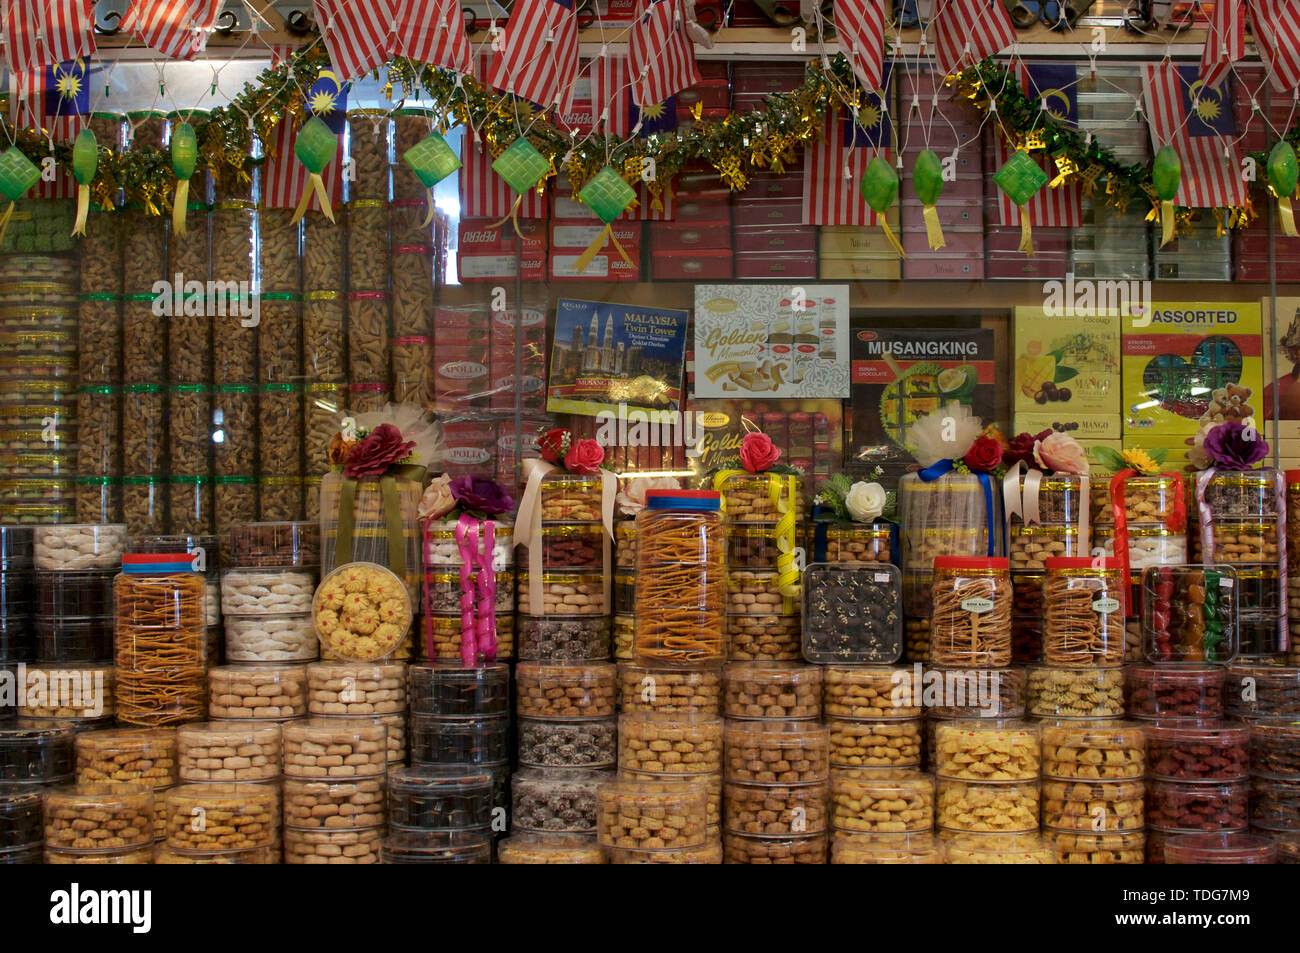 Kuala Lumpur, Malaysia - 9th May 2019 : Picture of a typical Malaysian Cookies shop located inside the Central Market in Kuala Lumpur, Malaysia Stock Photo